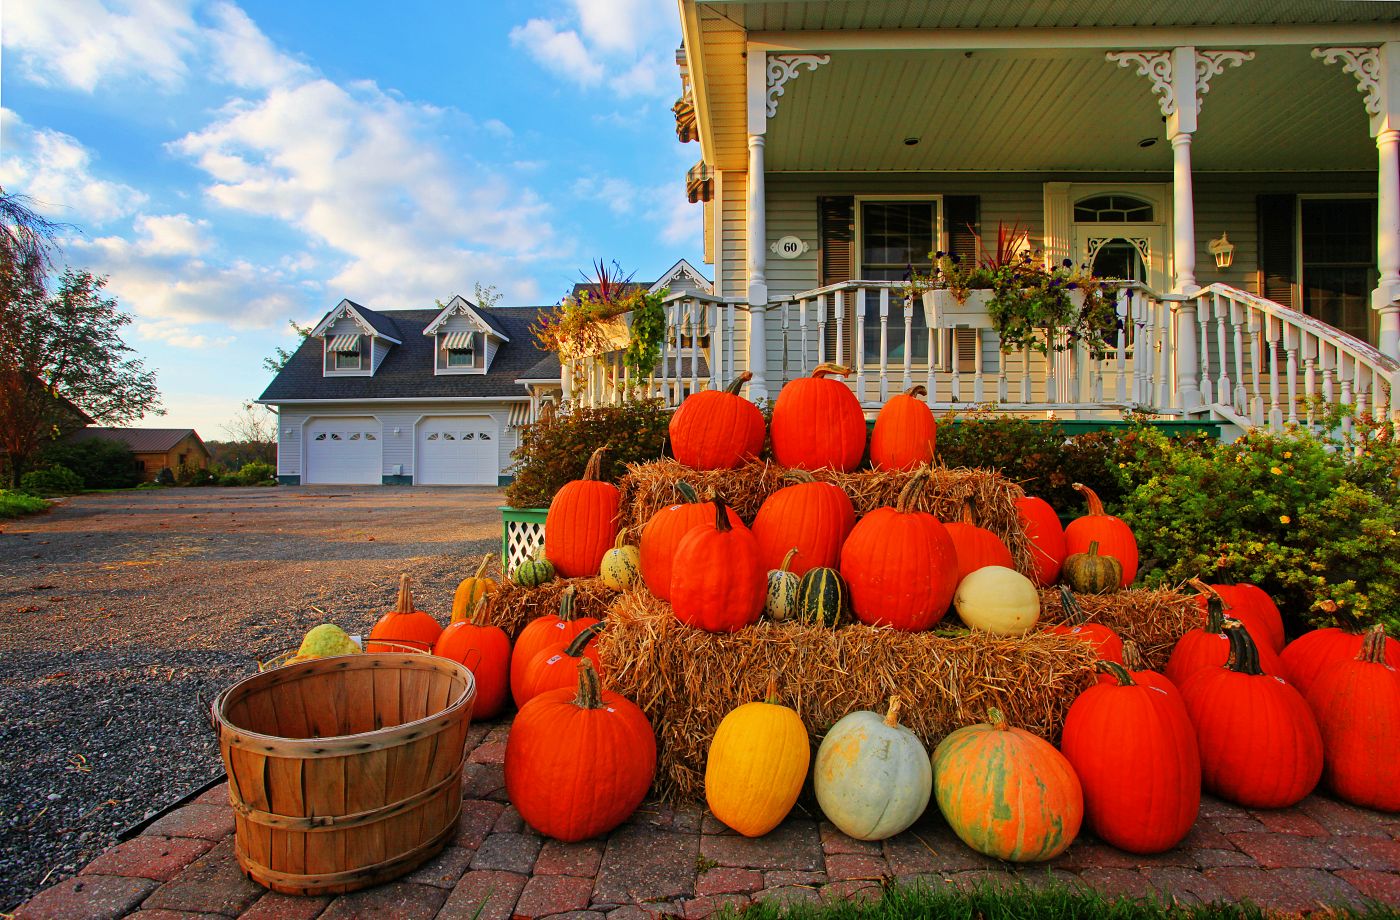 House with a lot of pumpkins in front of it